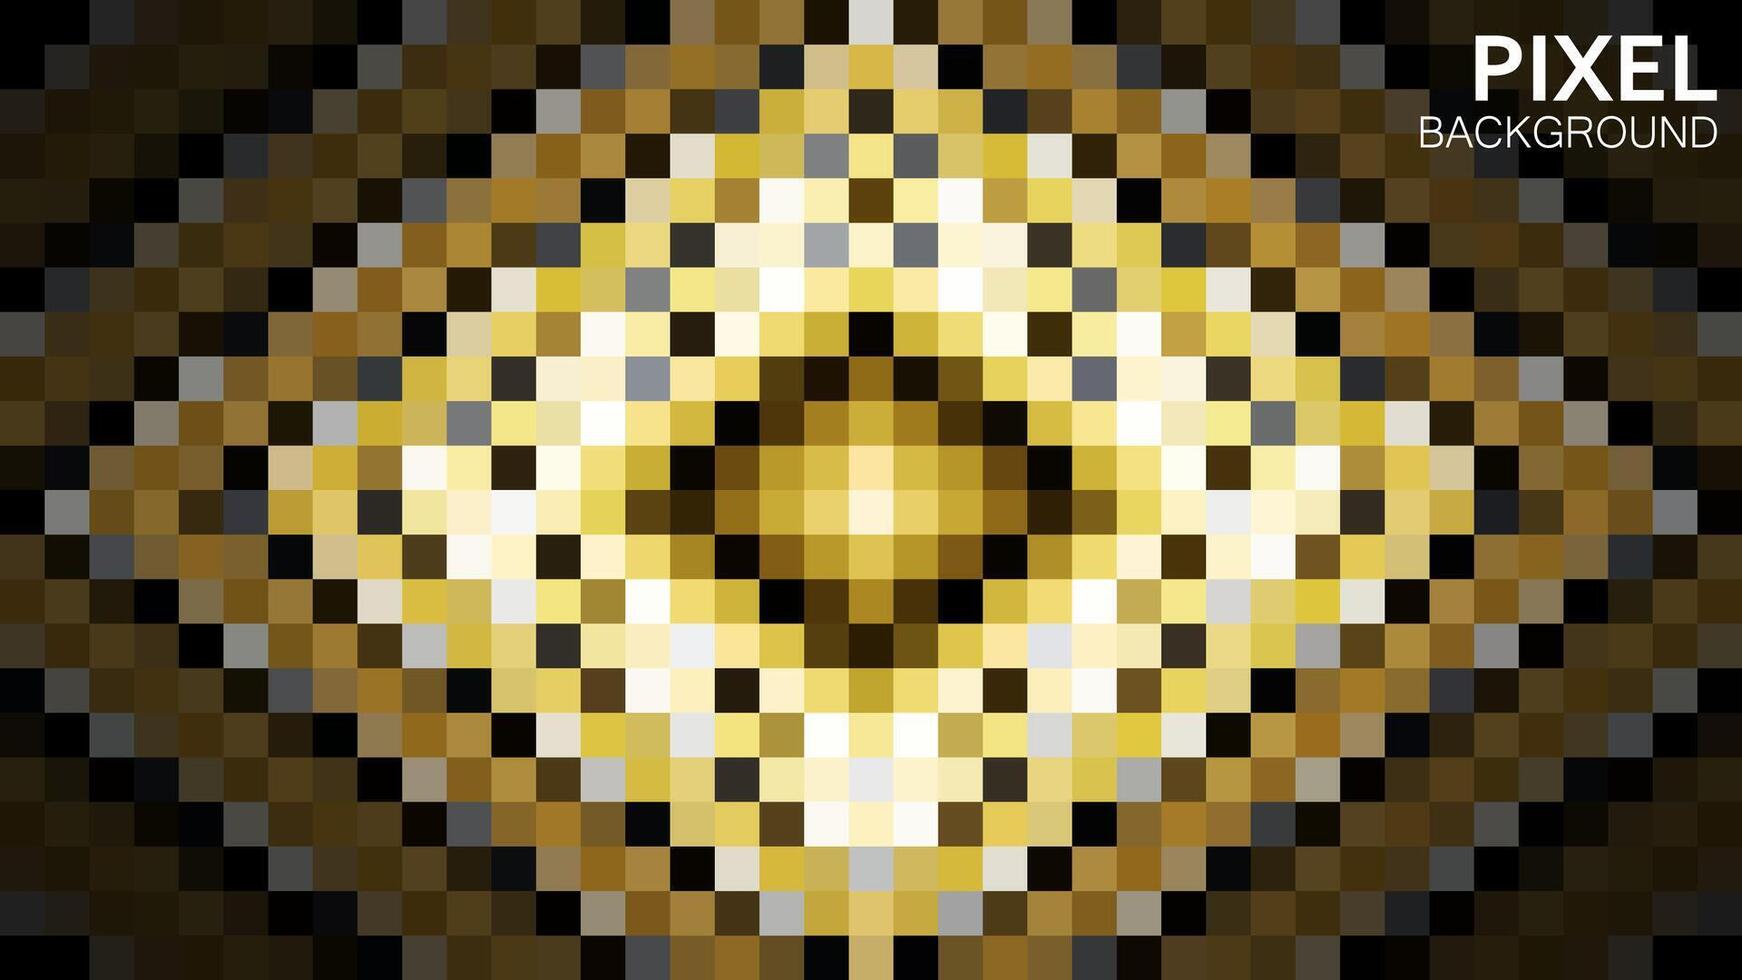 Geometric square gold background design pixel style. vector illustration. luxurious and dynamic effect